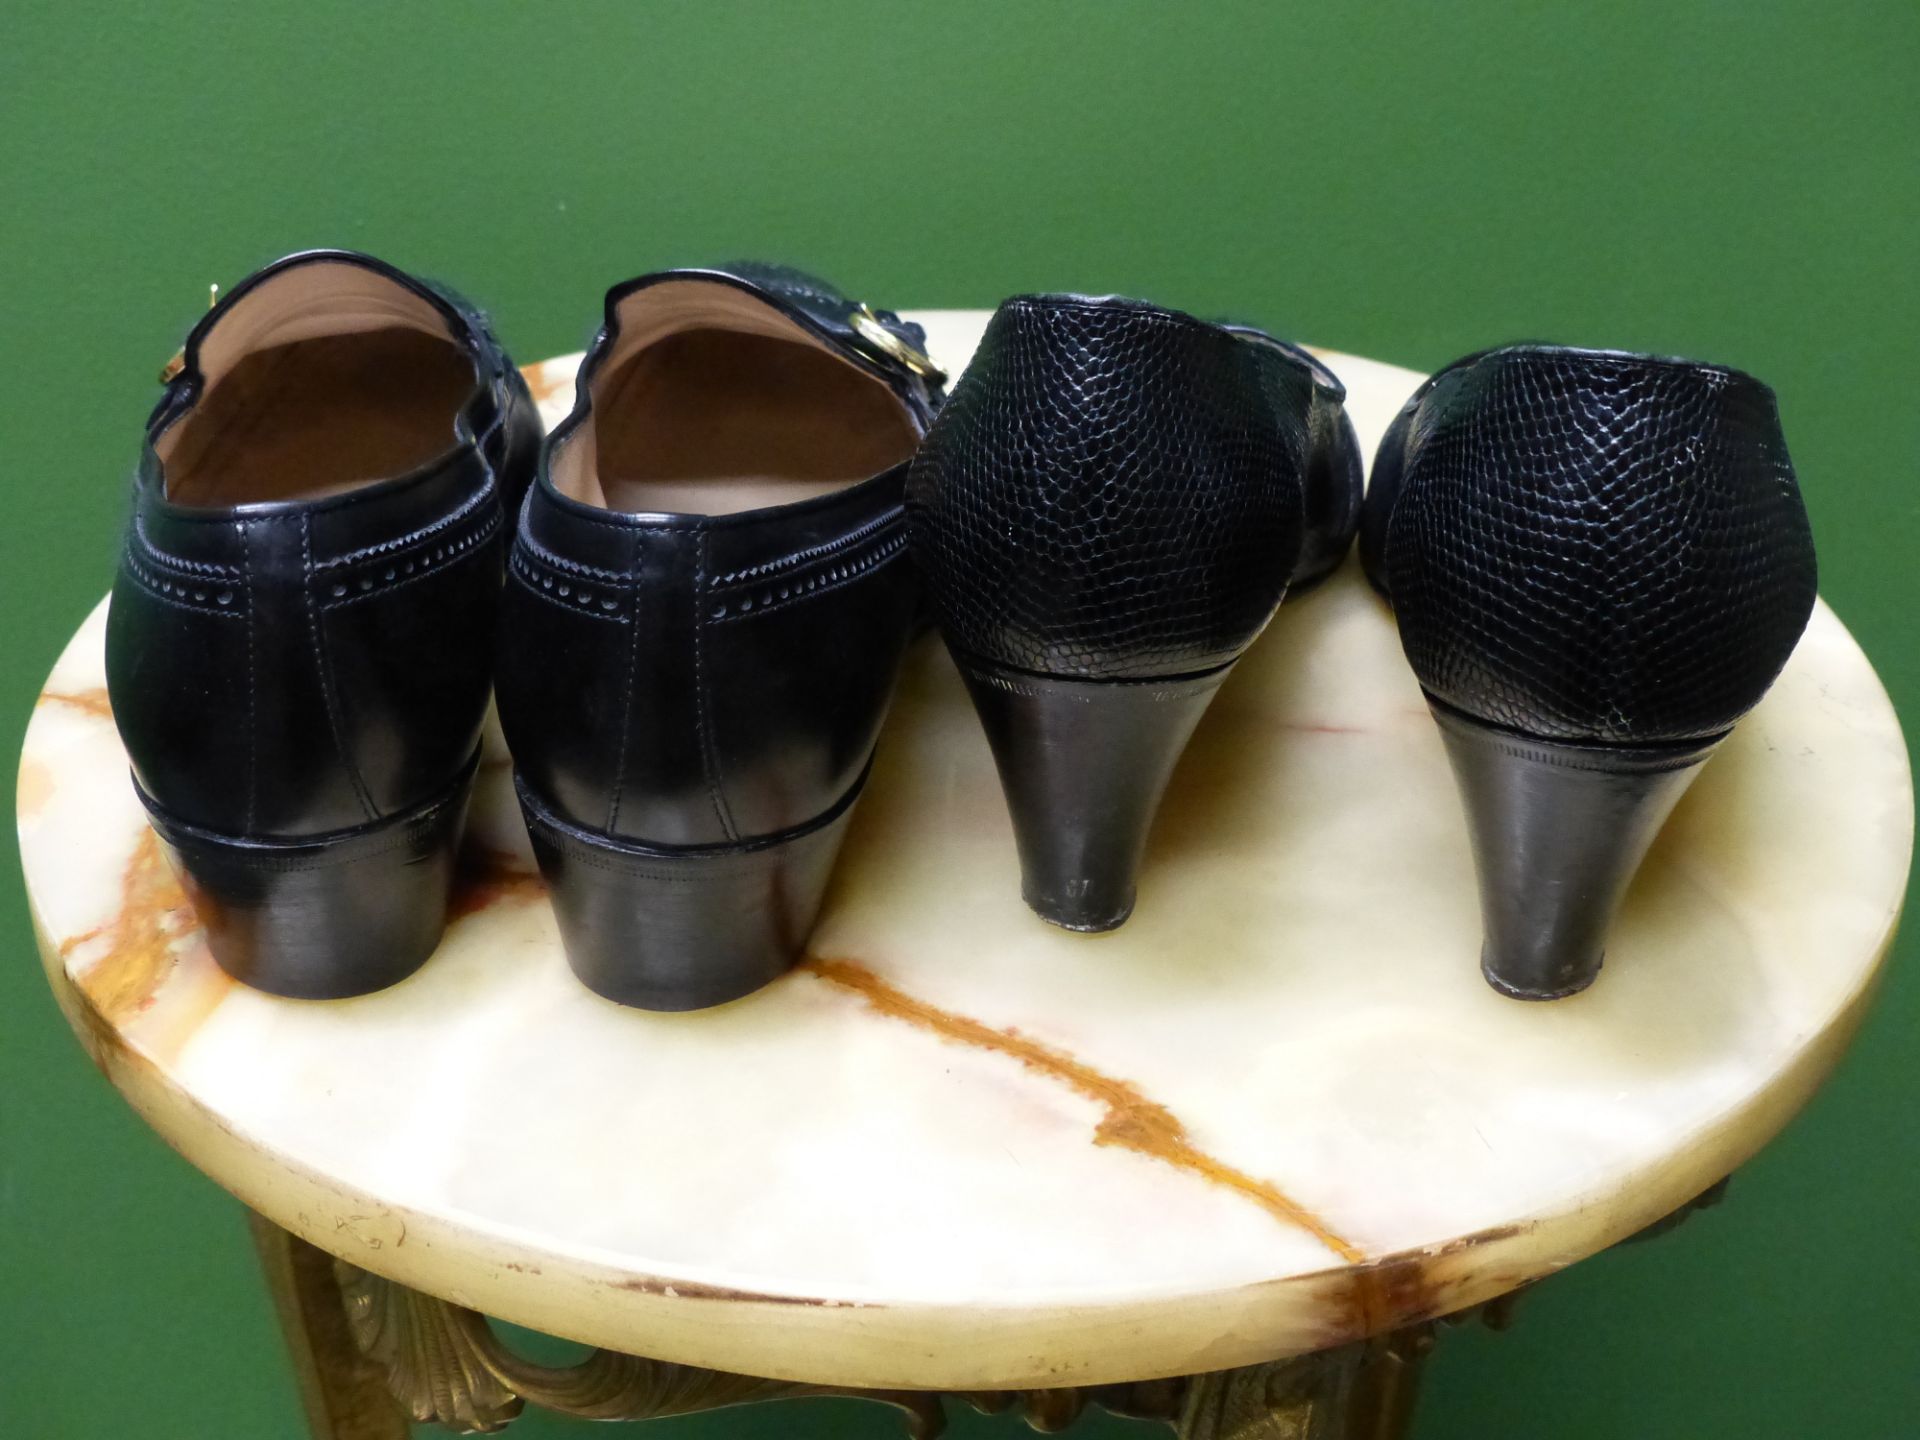 SHOES. TWO PAIRS TANINO CRISCI BLACK HEALS EUR SIZE 39. BLACK LOAFERS EUR SIZE 39. - Image 5 of 11